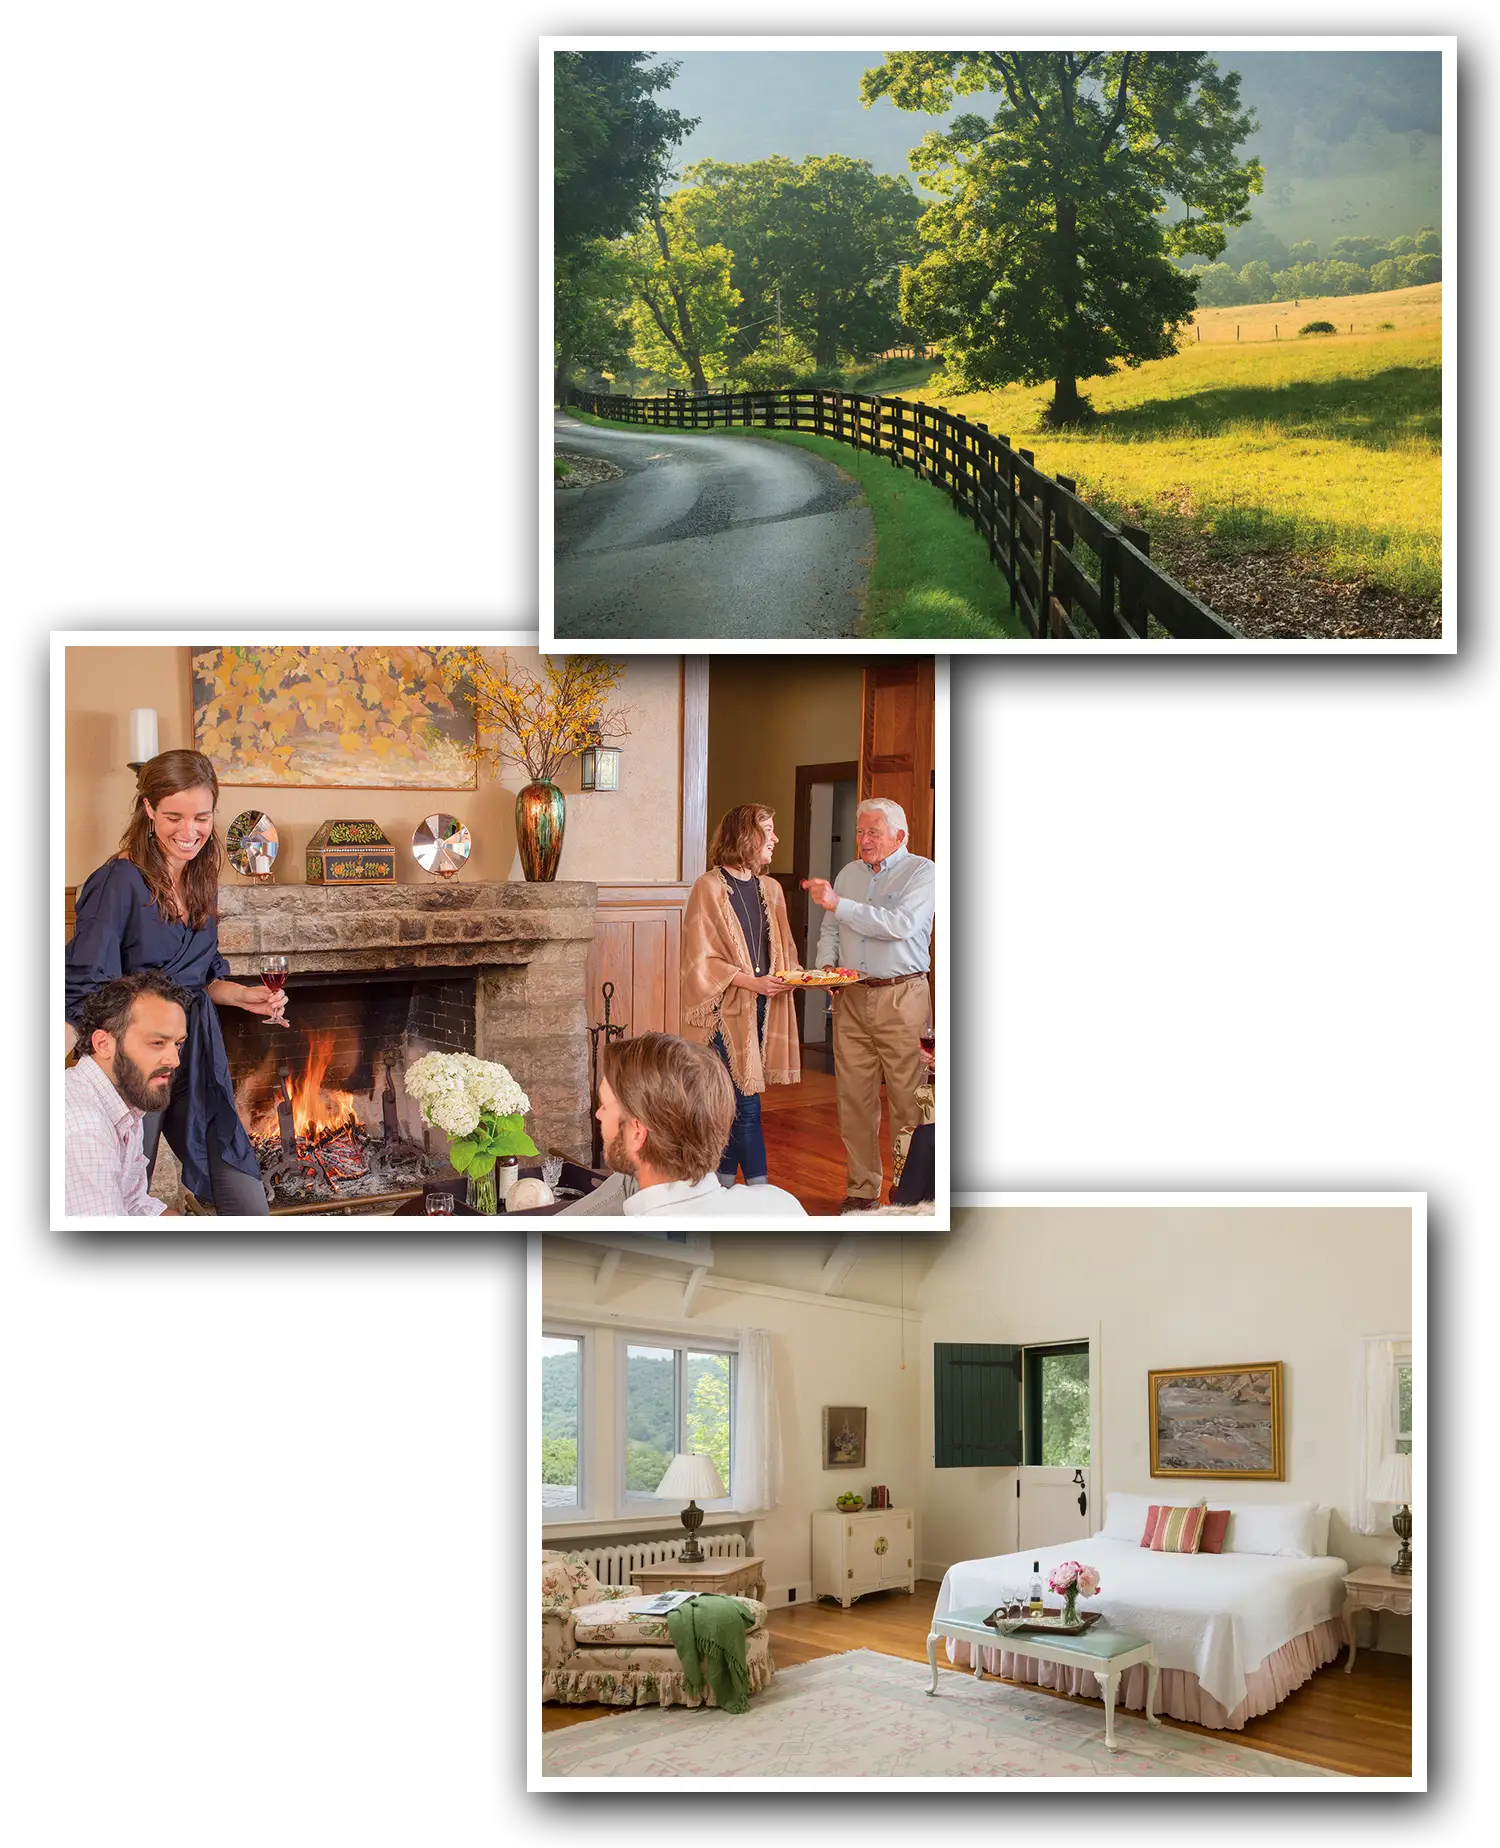 Collage of lush green landscape entering Garth Newel, People congregating in front of a fireplace in a common area, image of a suite bedroom.